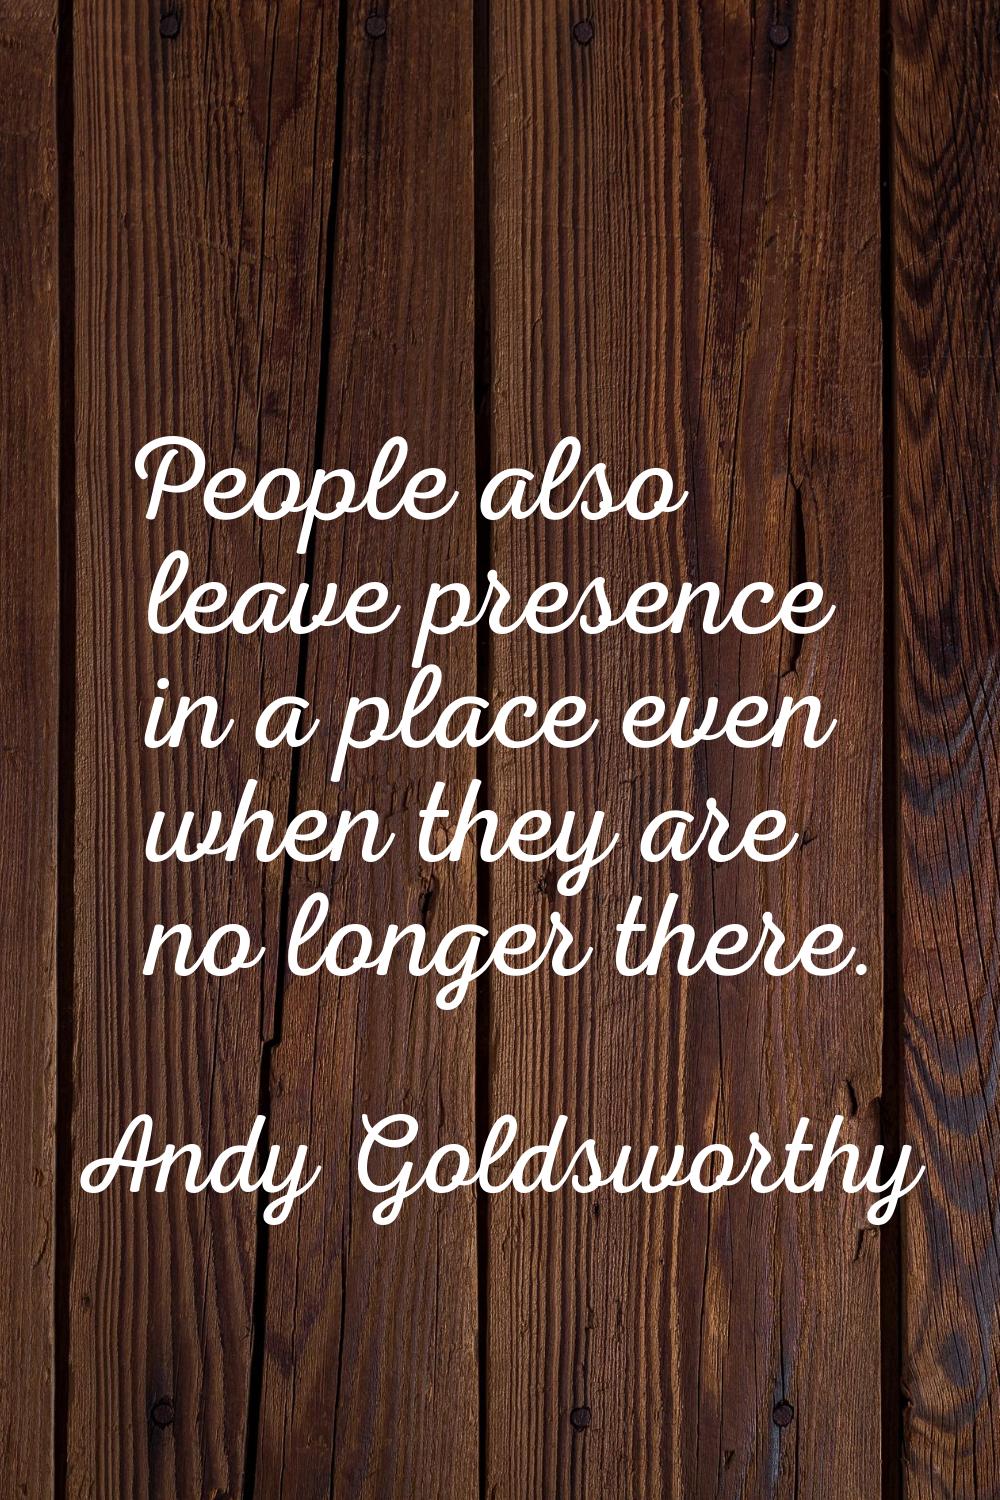 People also leave presence in a place even when they are no longer there.